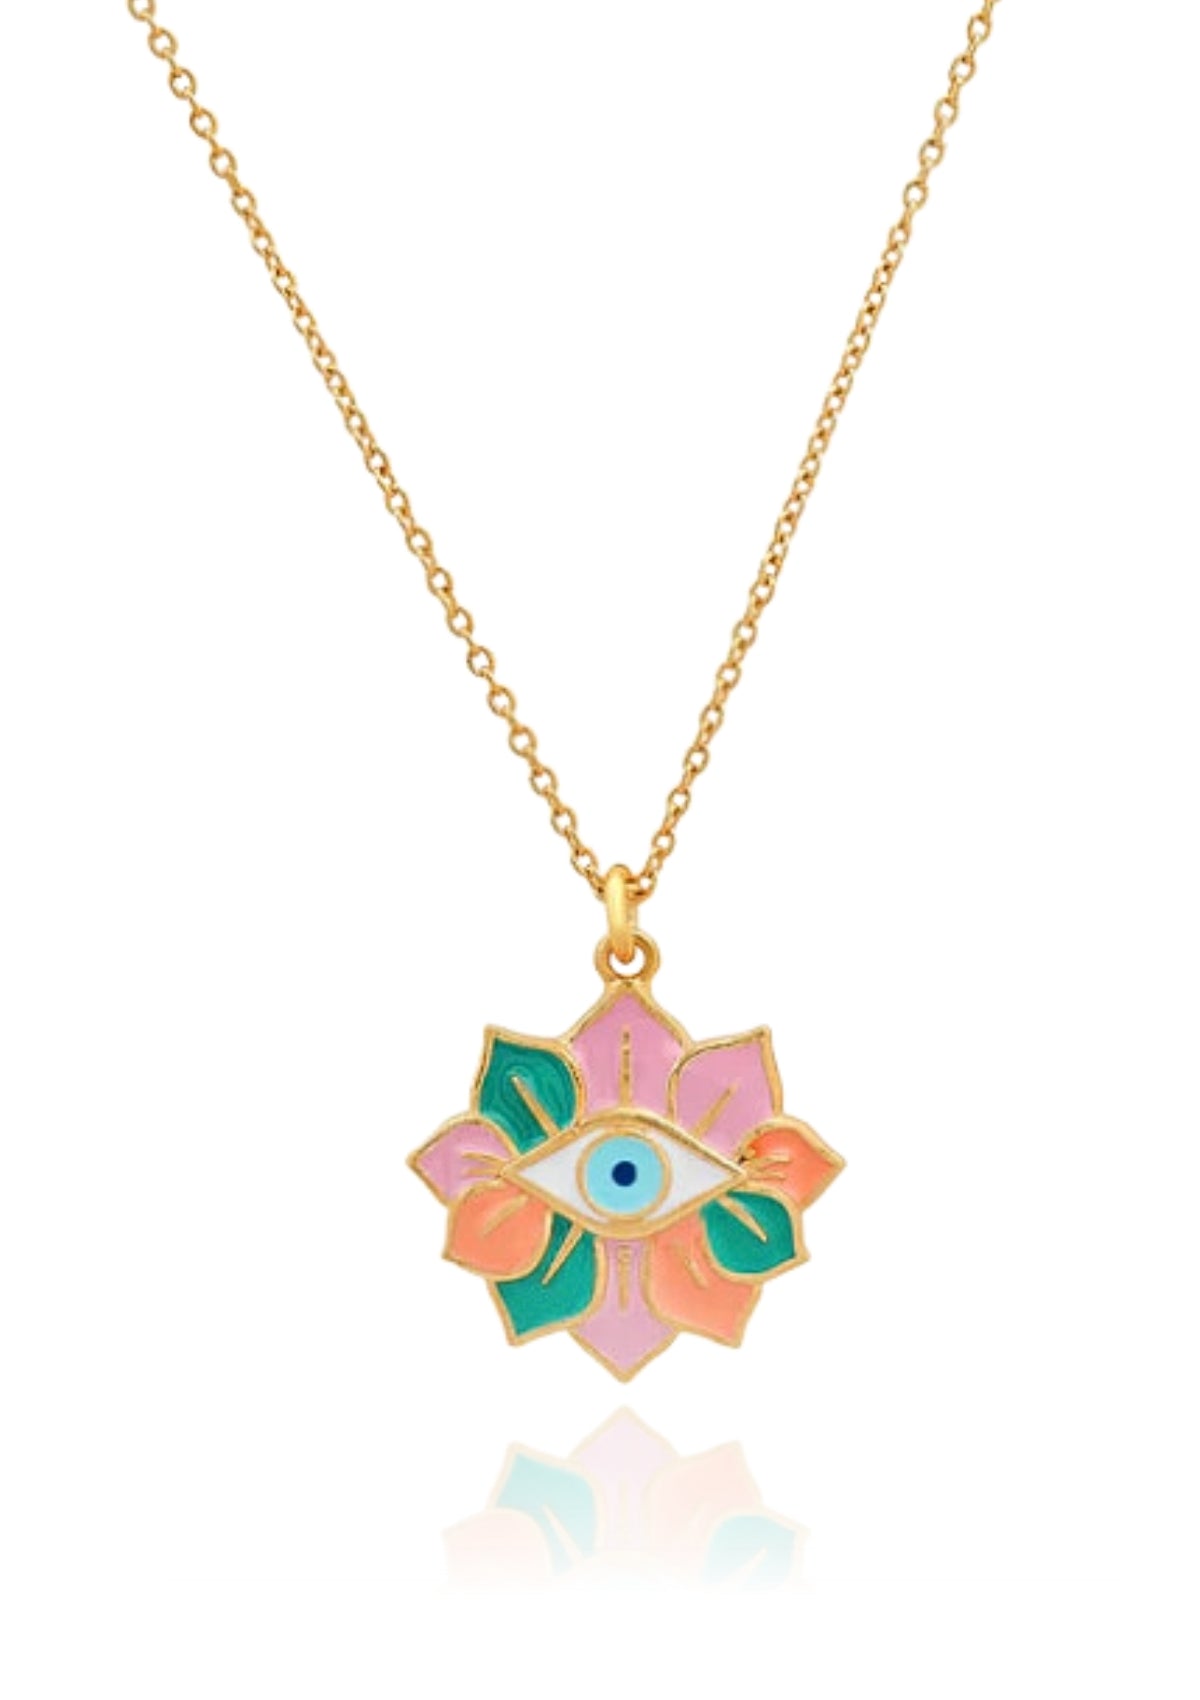 Gold Simple Chain Necklace with Mixed Colored Enamel Evil Eye Center Pendant -Tai Rittichai- Ruby Jane-